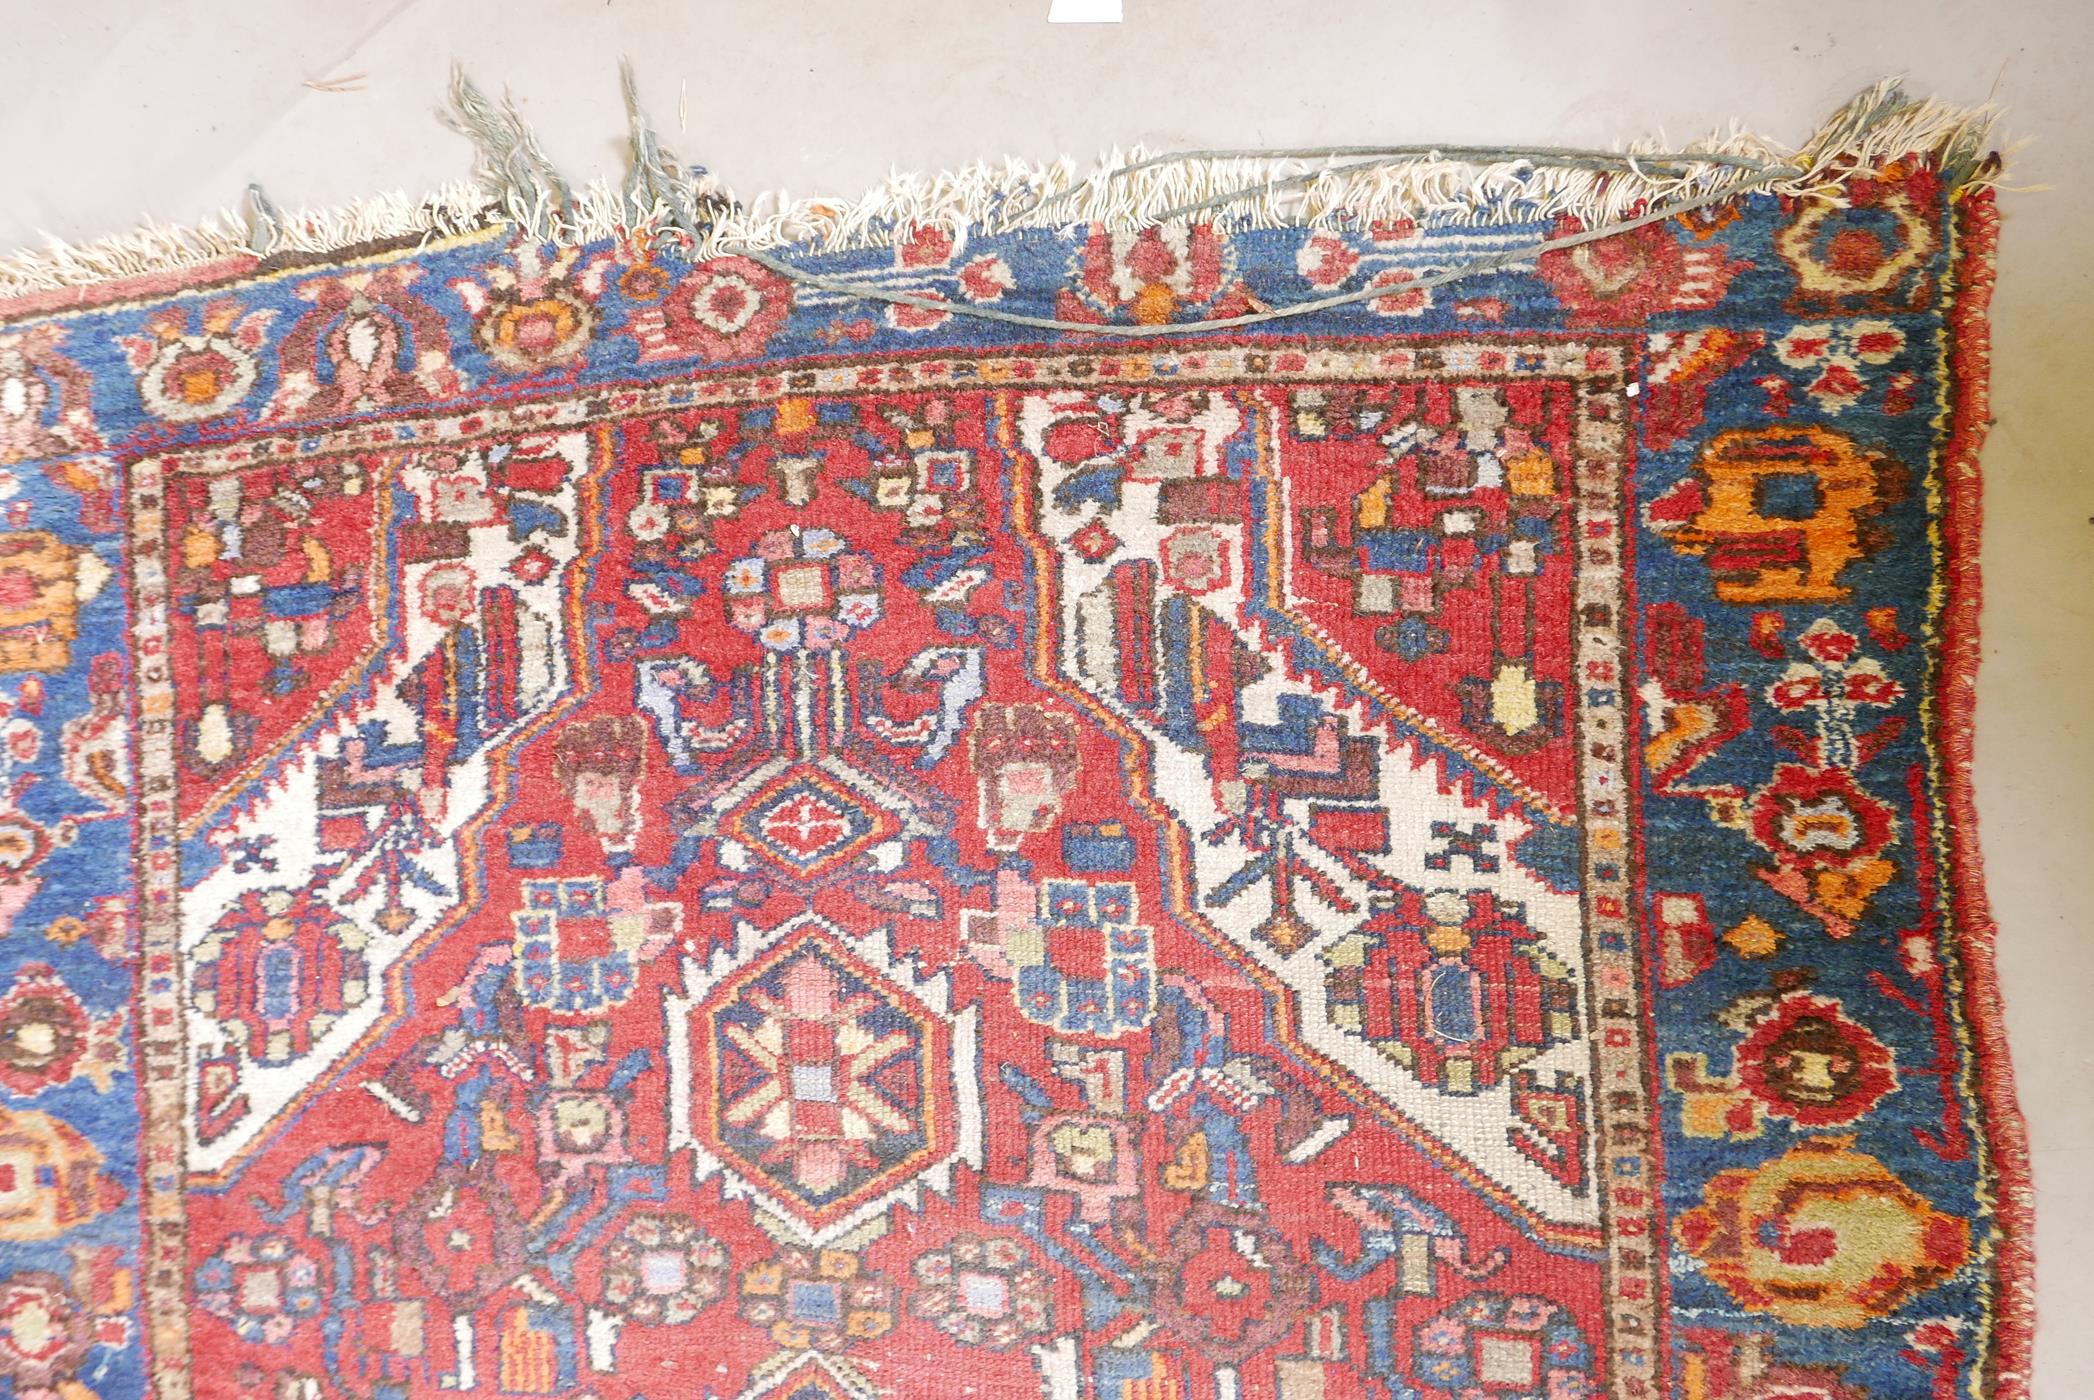 A Persian red ground wool carpet with a central floral medallion design and blue borders, 83" x 52" - Image 2 of 4